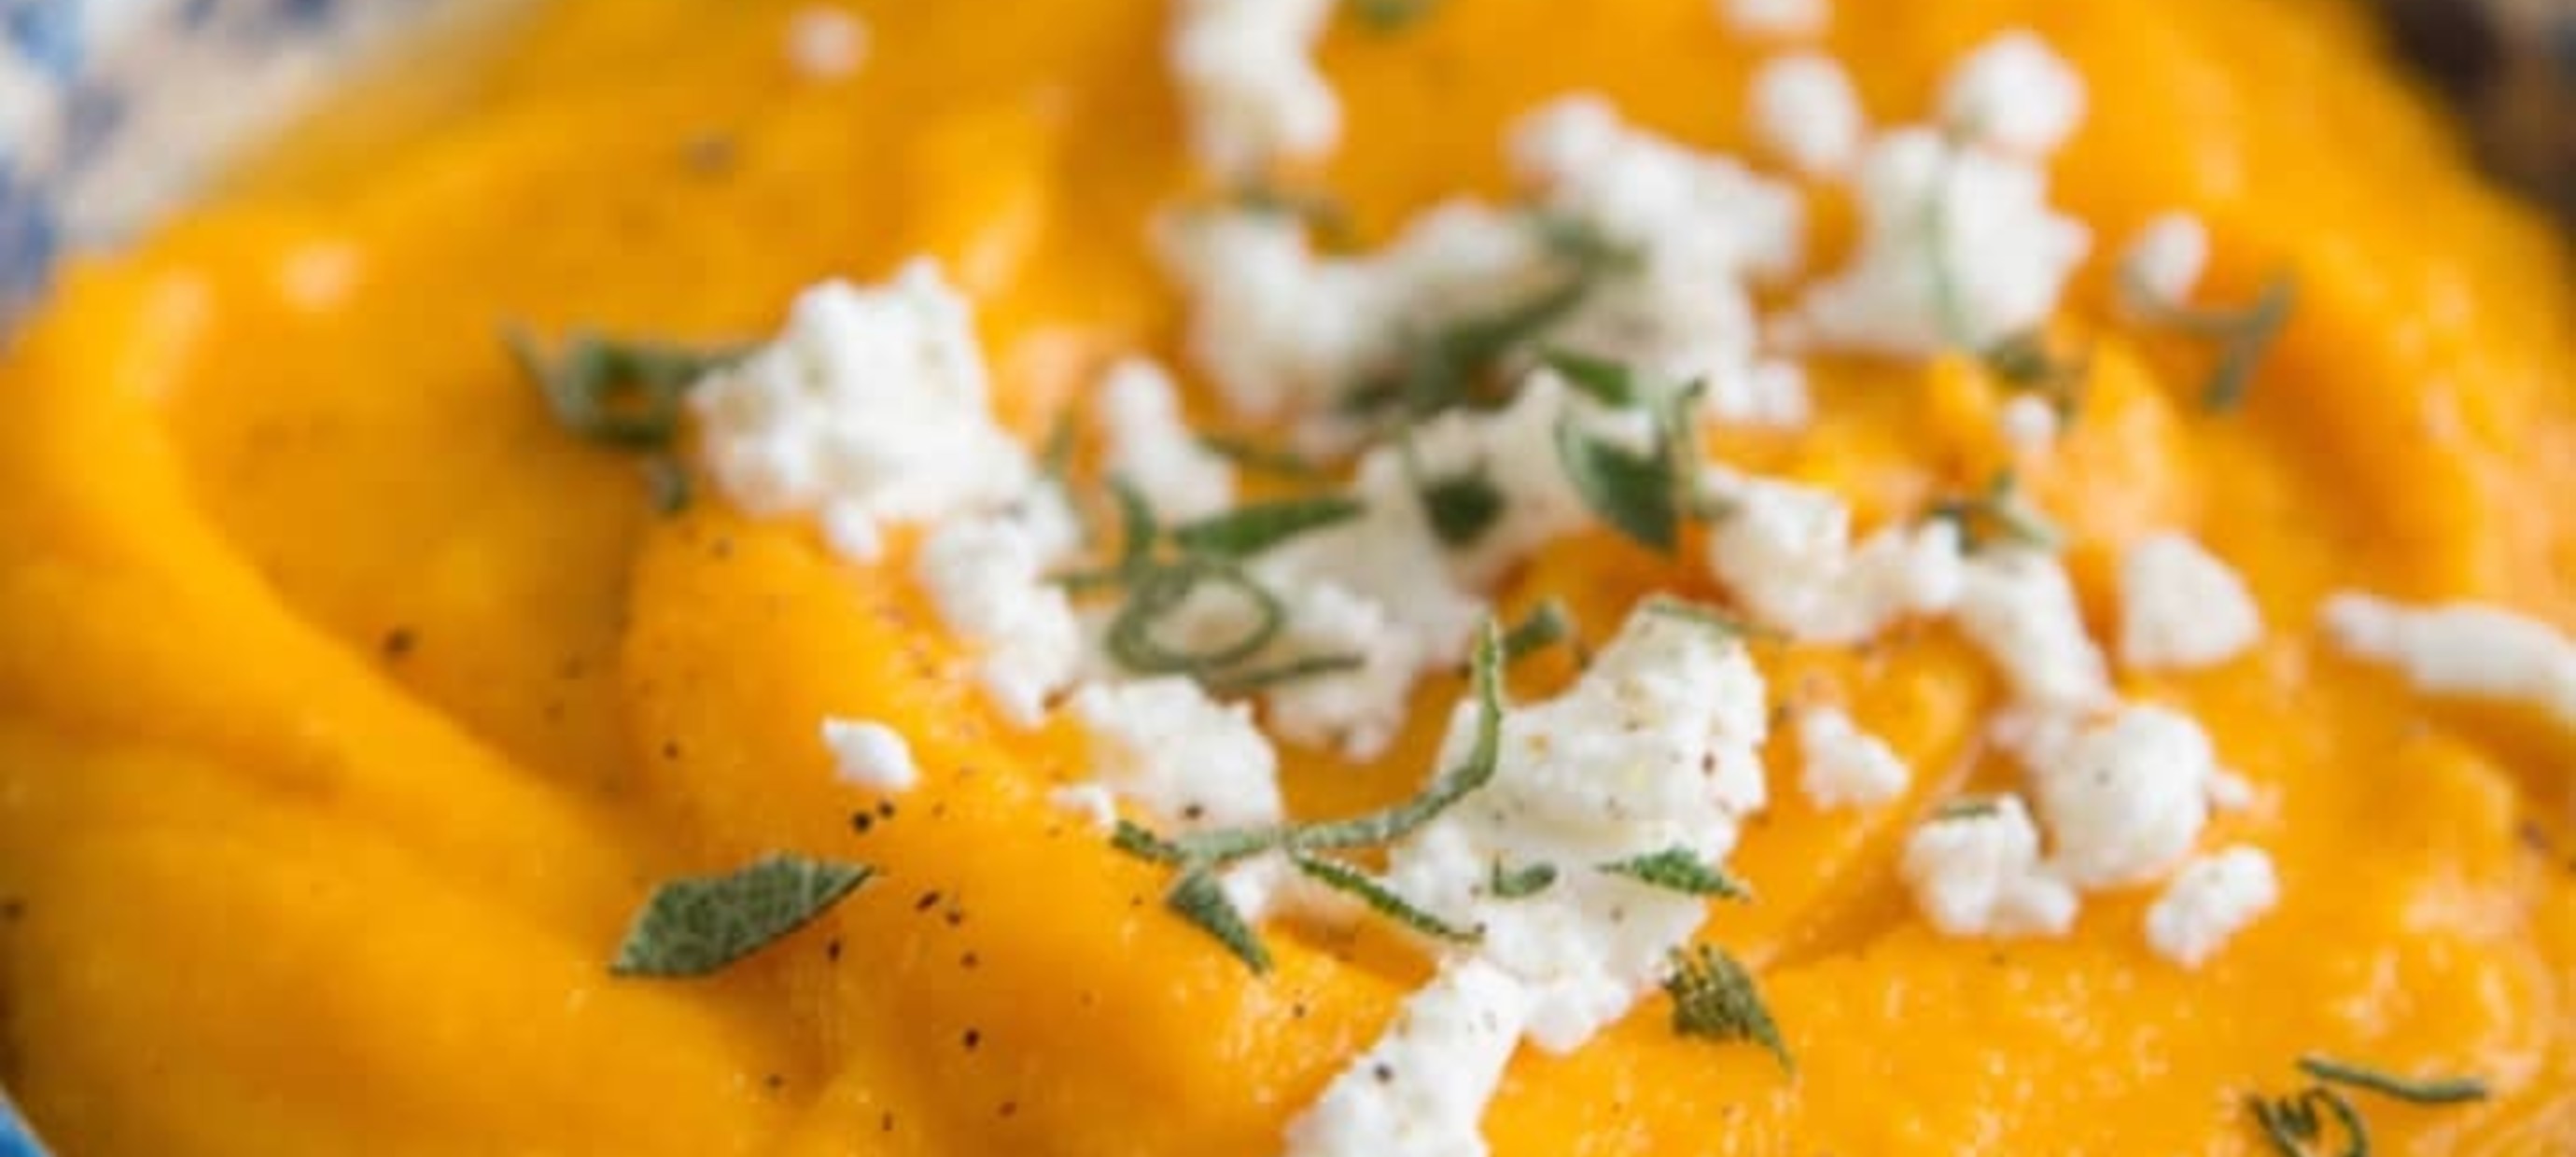 Roasted Butternut Squash Purée with Goat Cheese